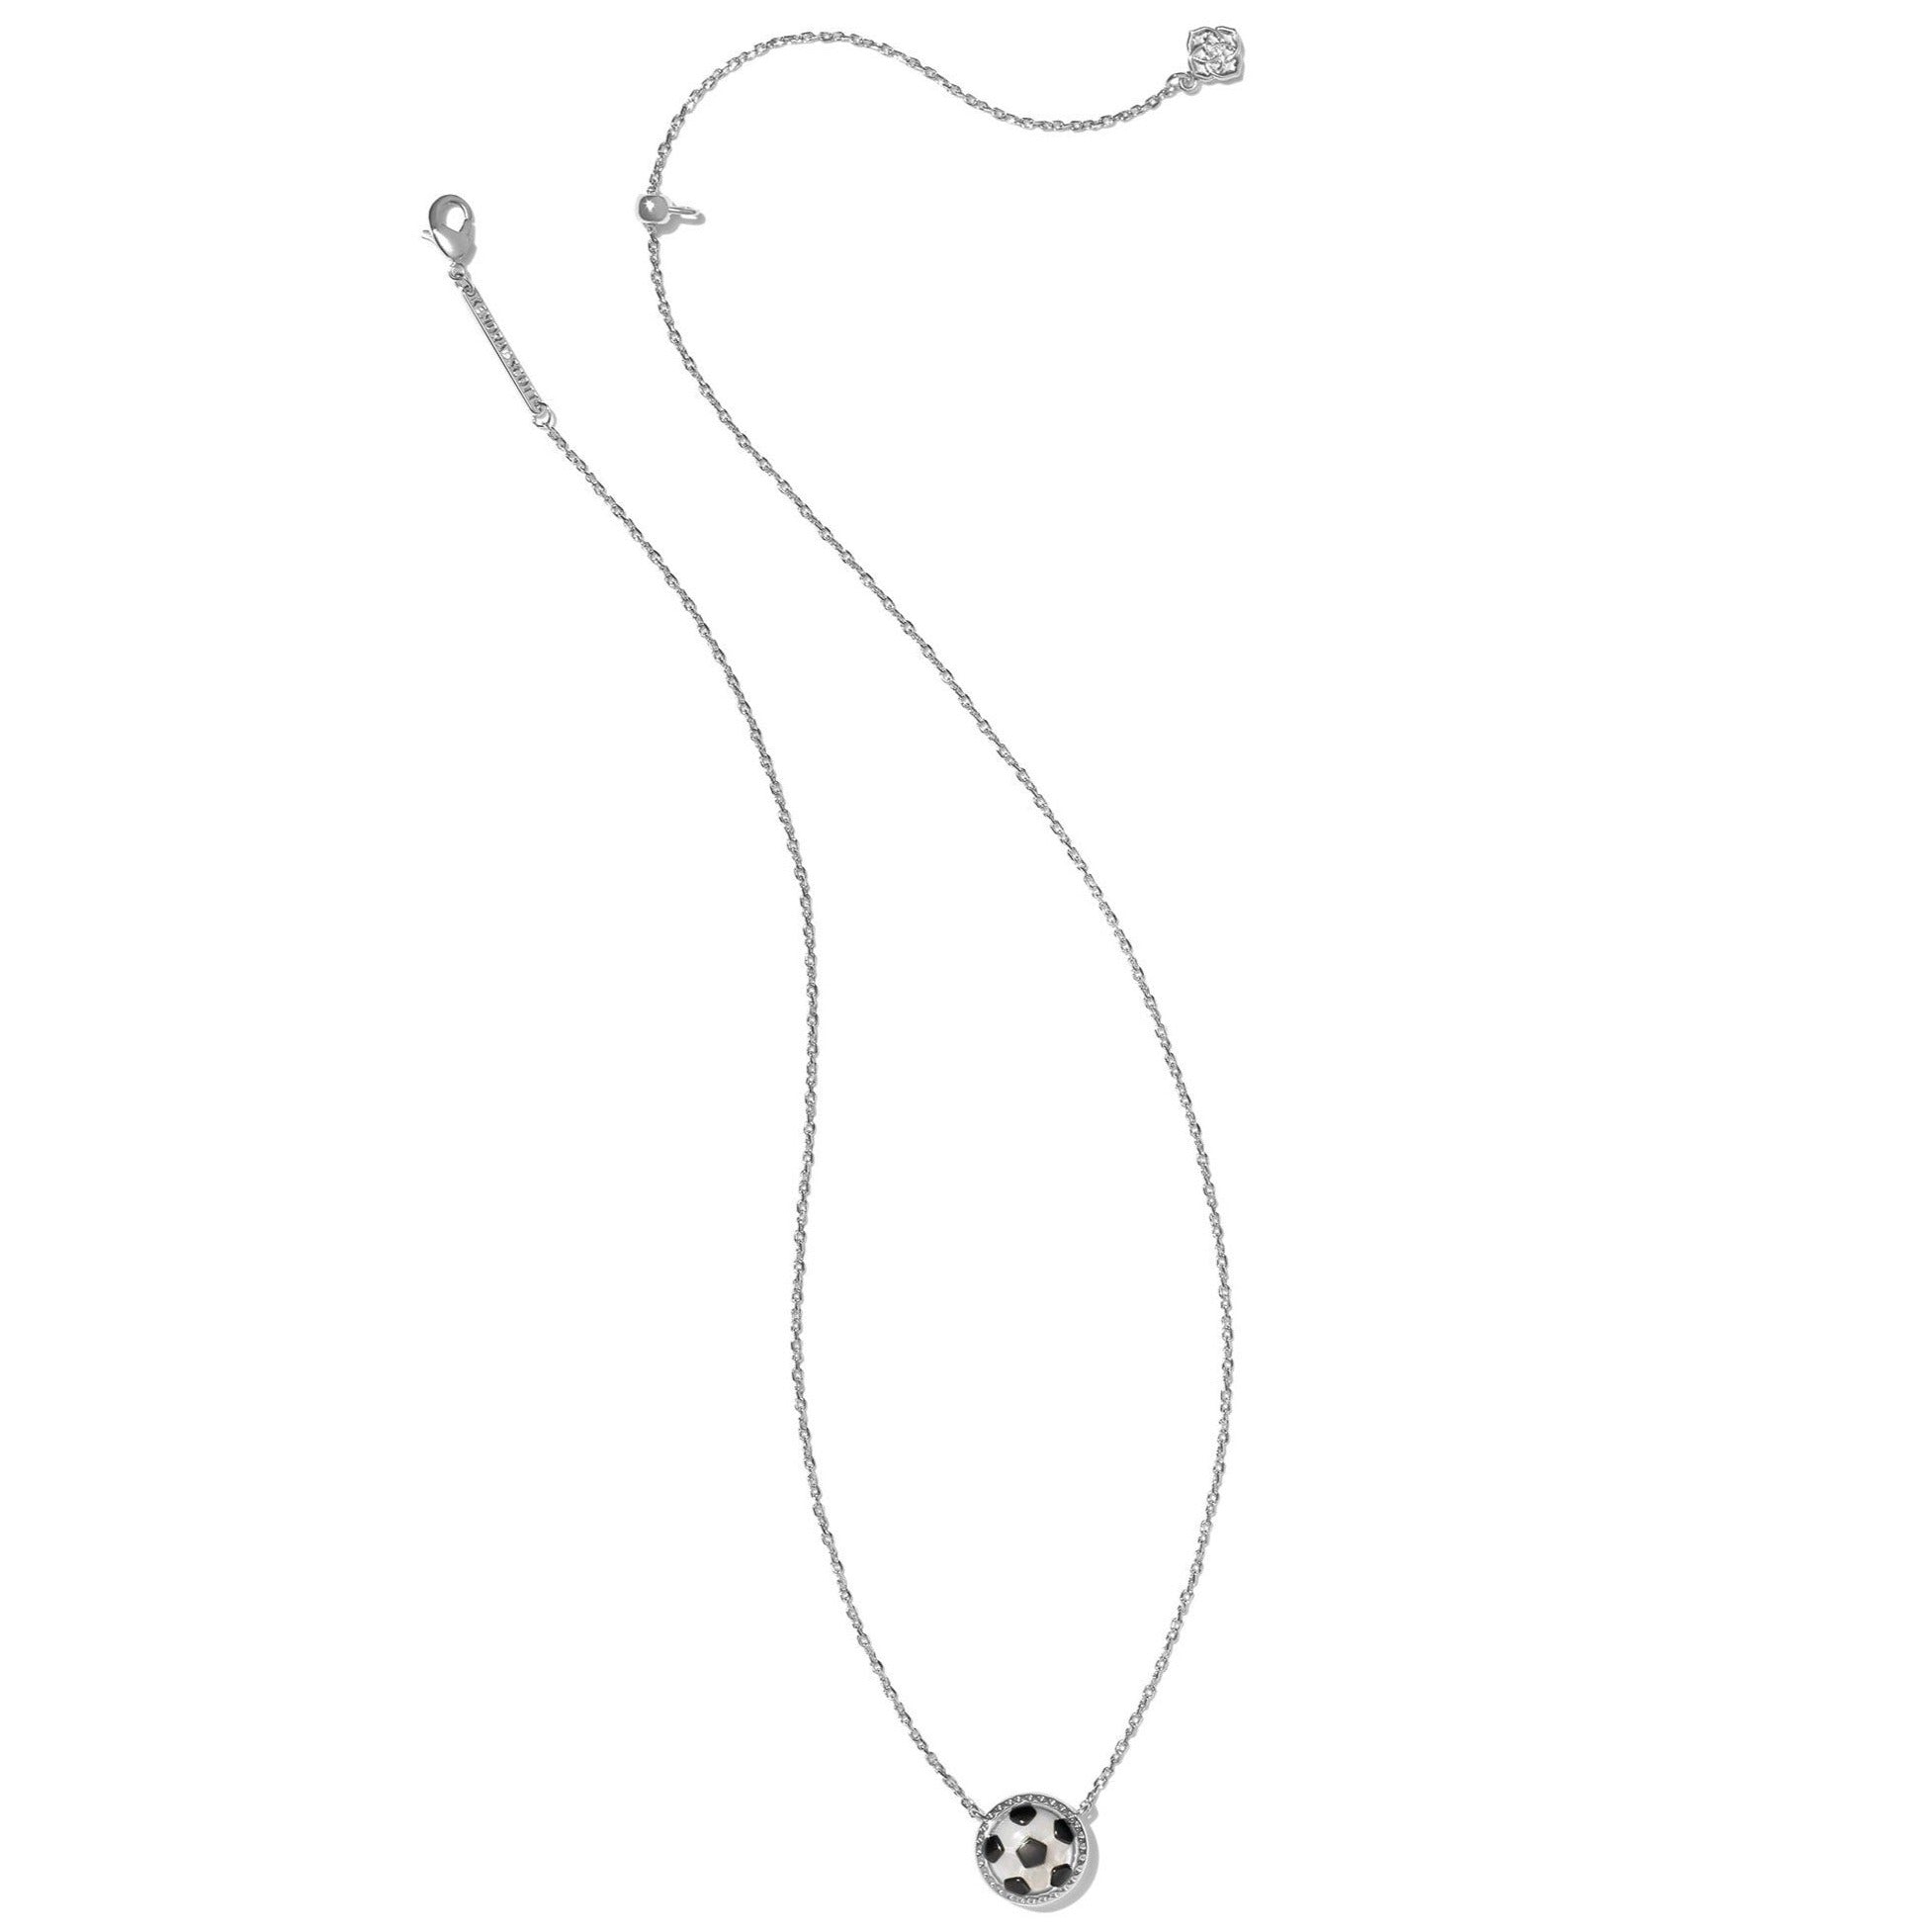 Kendra Scott | Soccer Silver Short Pendant Necklace in Ivory Mother-of-Pearl - Giddy Up Glamour Boutique